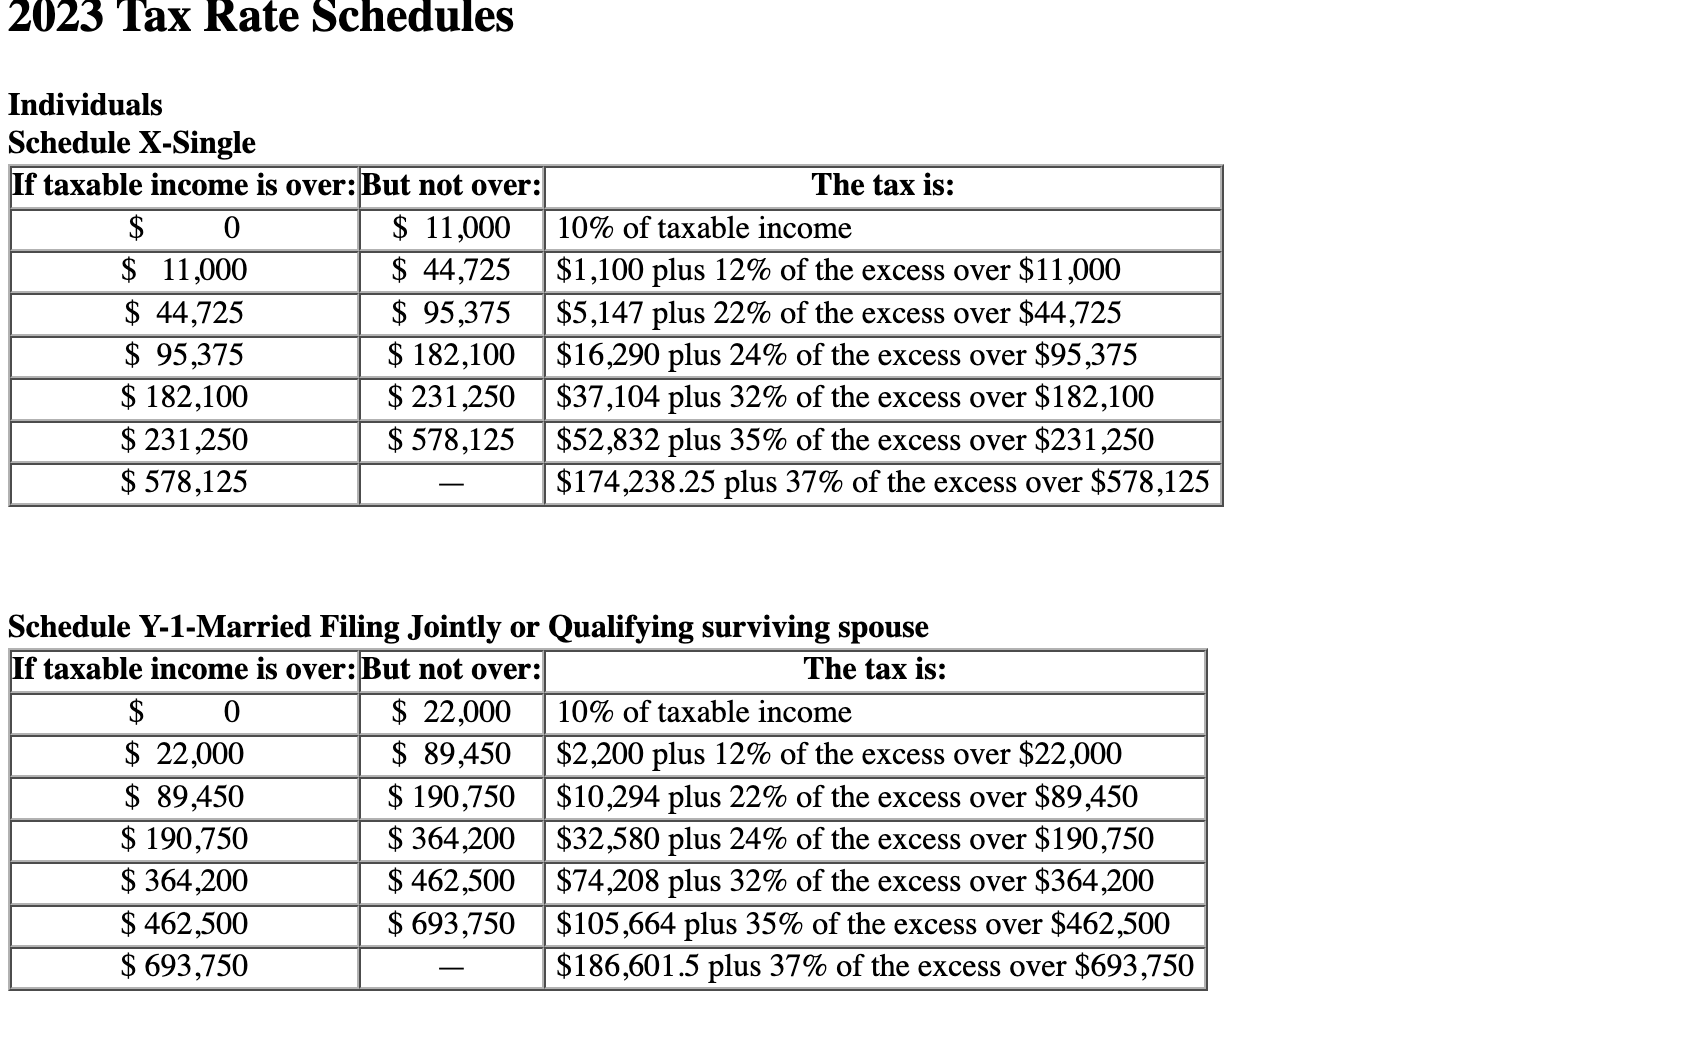 2023 Tax Rate Schedules Individuals Schedule X-Single If taxable income is over: But not over: $ 0 $ 11,000 $